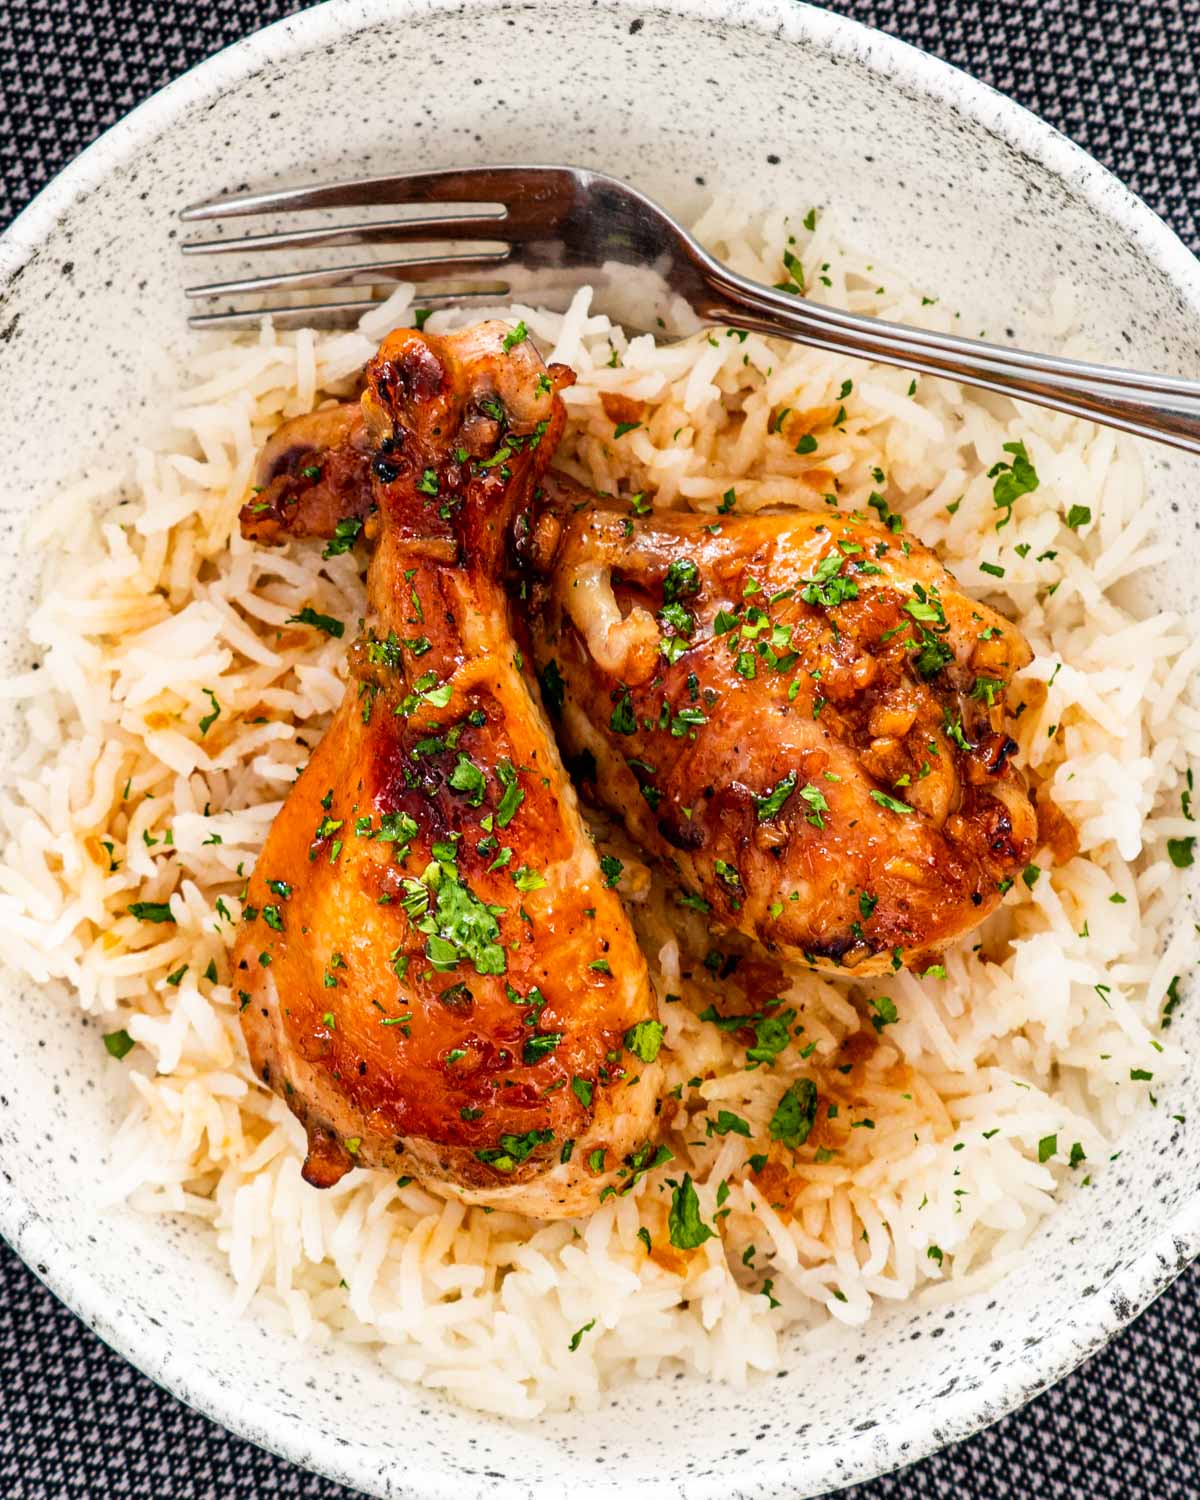 two honey soy chicken drumsticks over a bed of rice garnished with parsley.